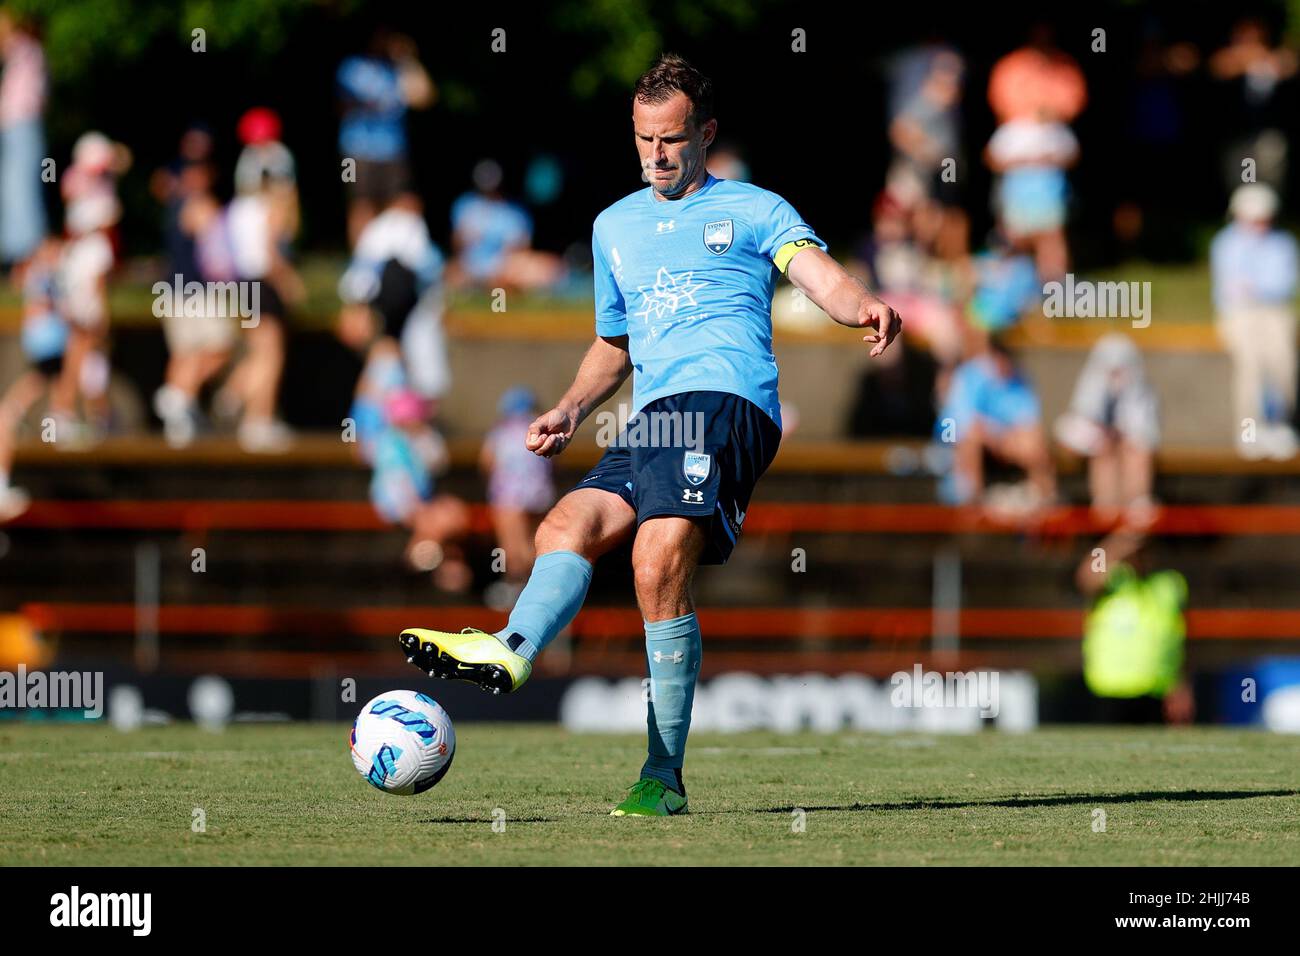 Sydney, Australia, 30 January, 2022. Alex Wilkinson of Sydney FC passes the ball during the A-League soccer match between Sydney FC and Central Coast Mariners. Credit: Pete Dovgan/Speed Media/Alamy Live News Stock Photo